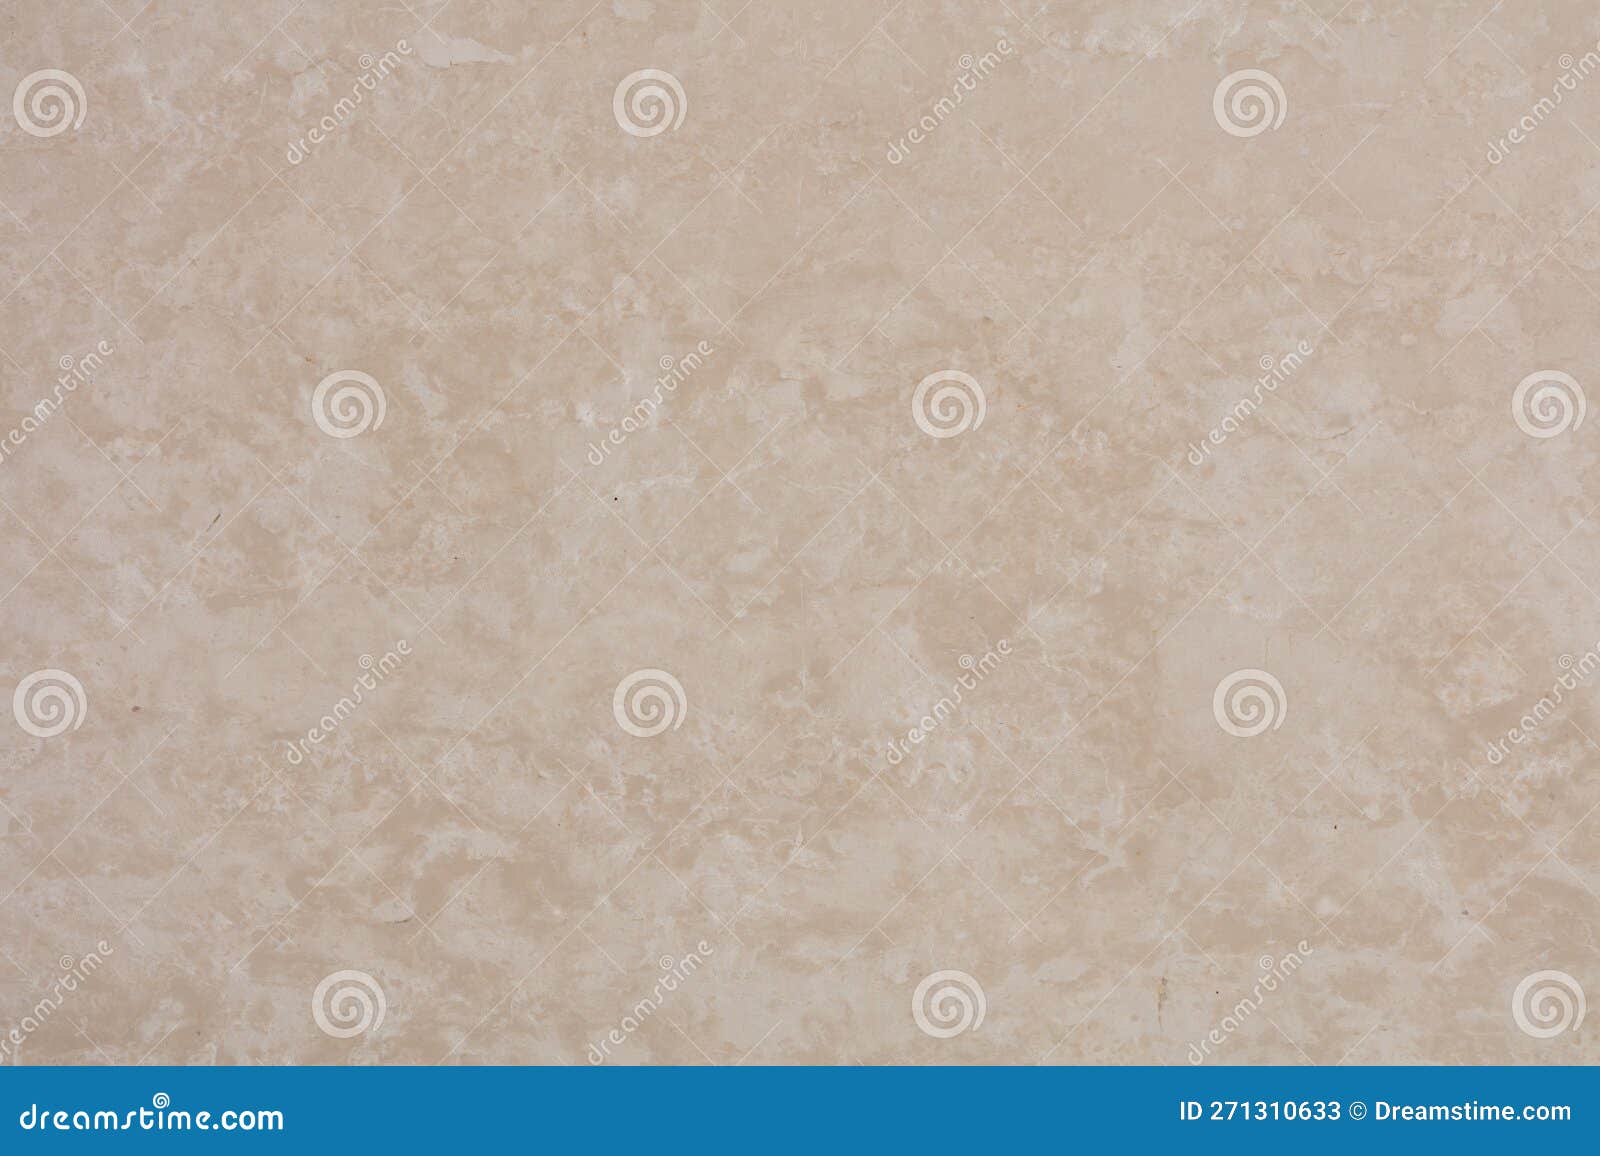 botticino fiorito marble background, new texture in a gentle light color for interior work.